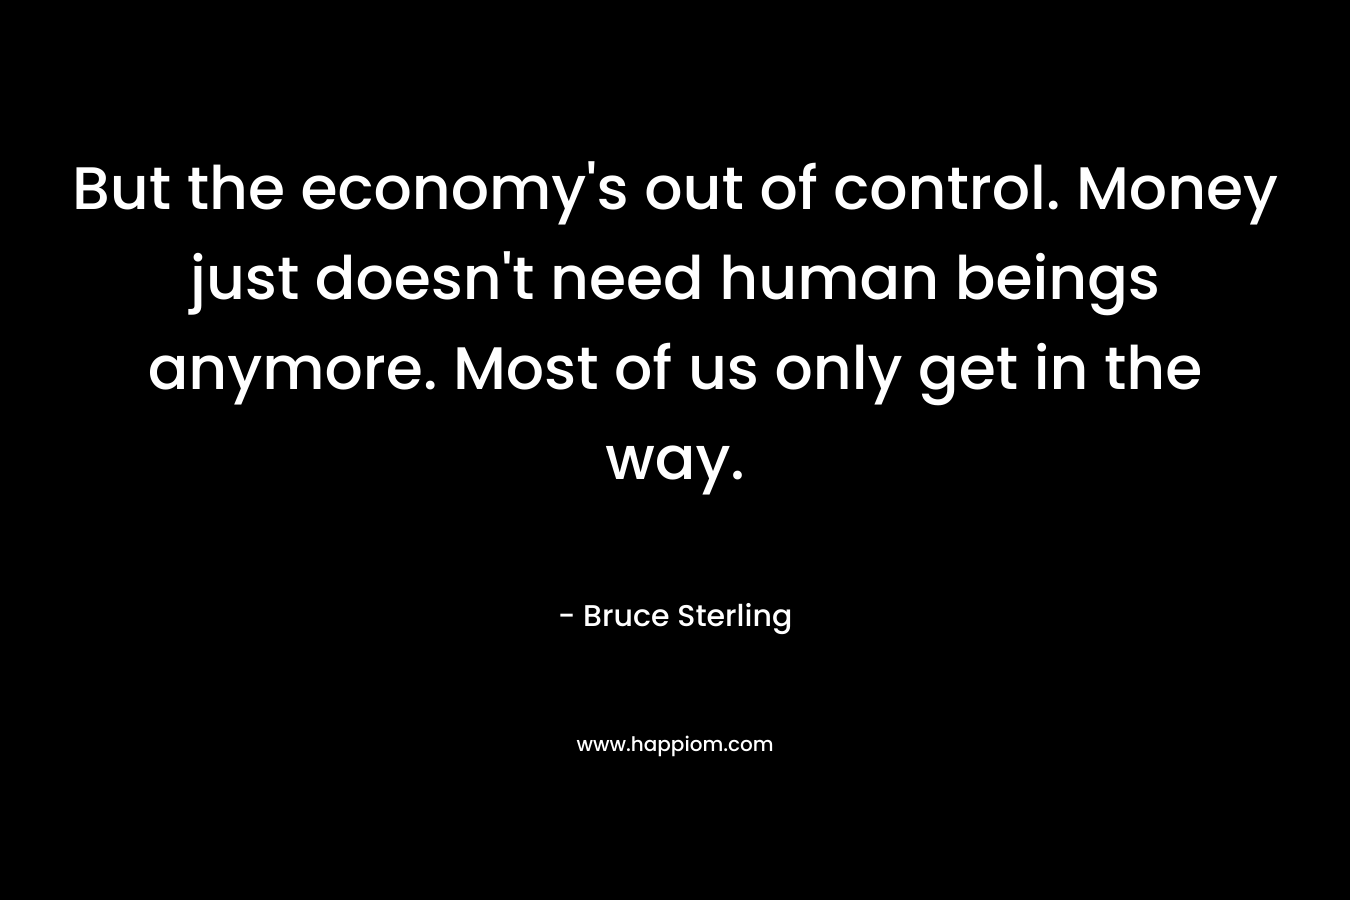 But the economy’s out of control. Money just doesn’t need human beings anymore. Most of us only get in the way. – Bruce Sterling